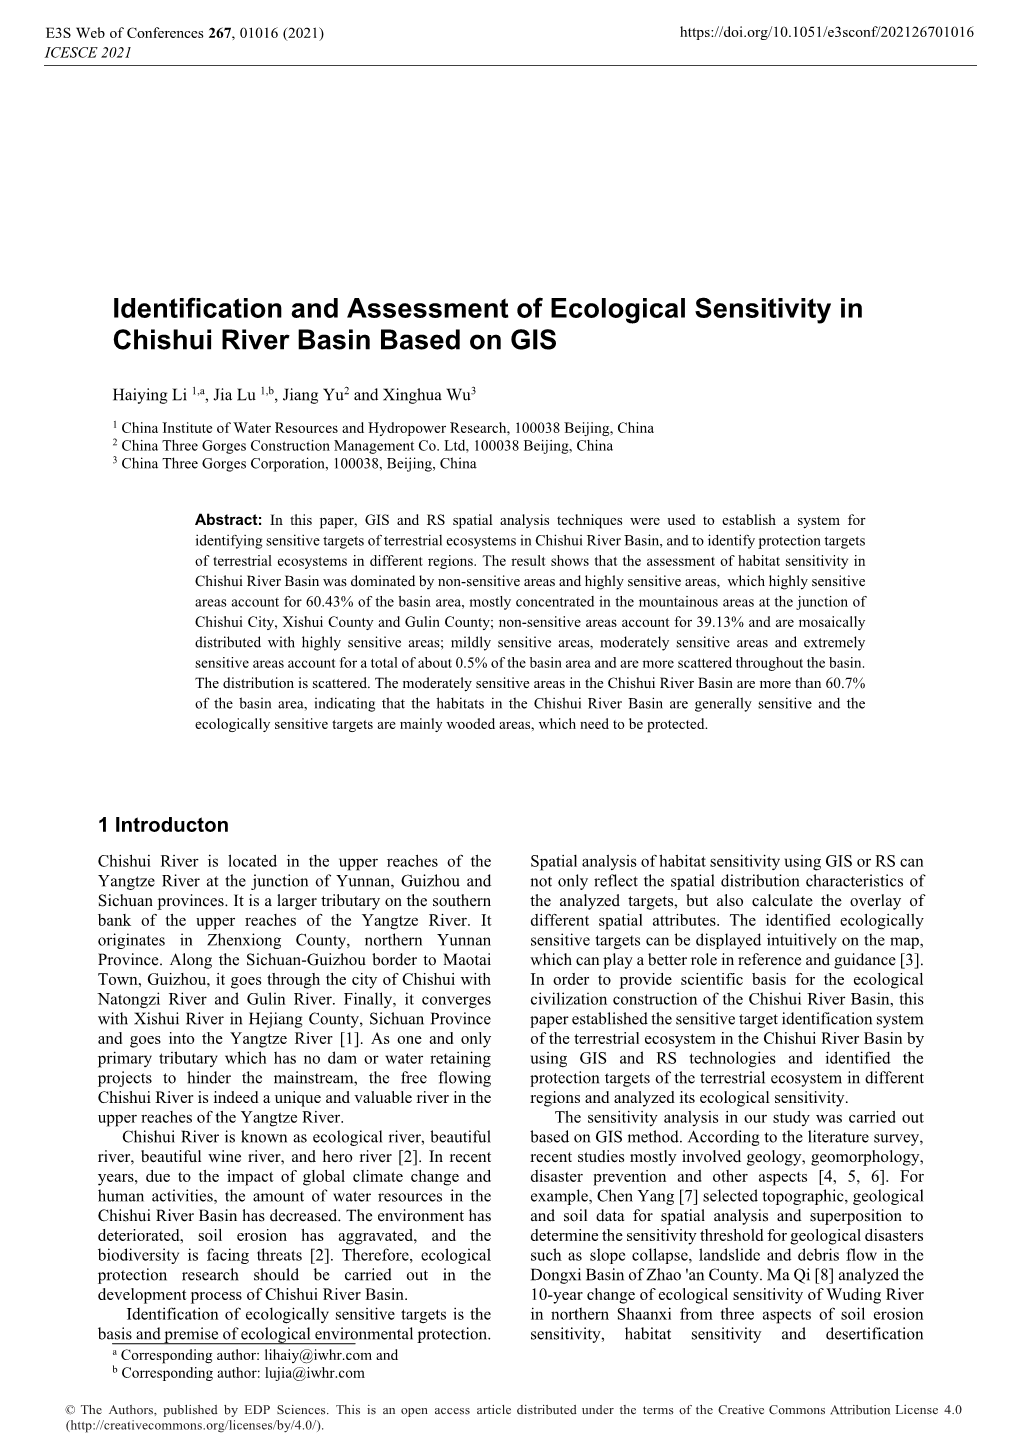 Identification and Assessment of Ecological Sensitivity in Chishui River Basin Based on GIS